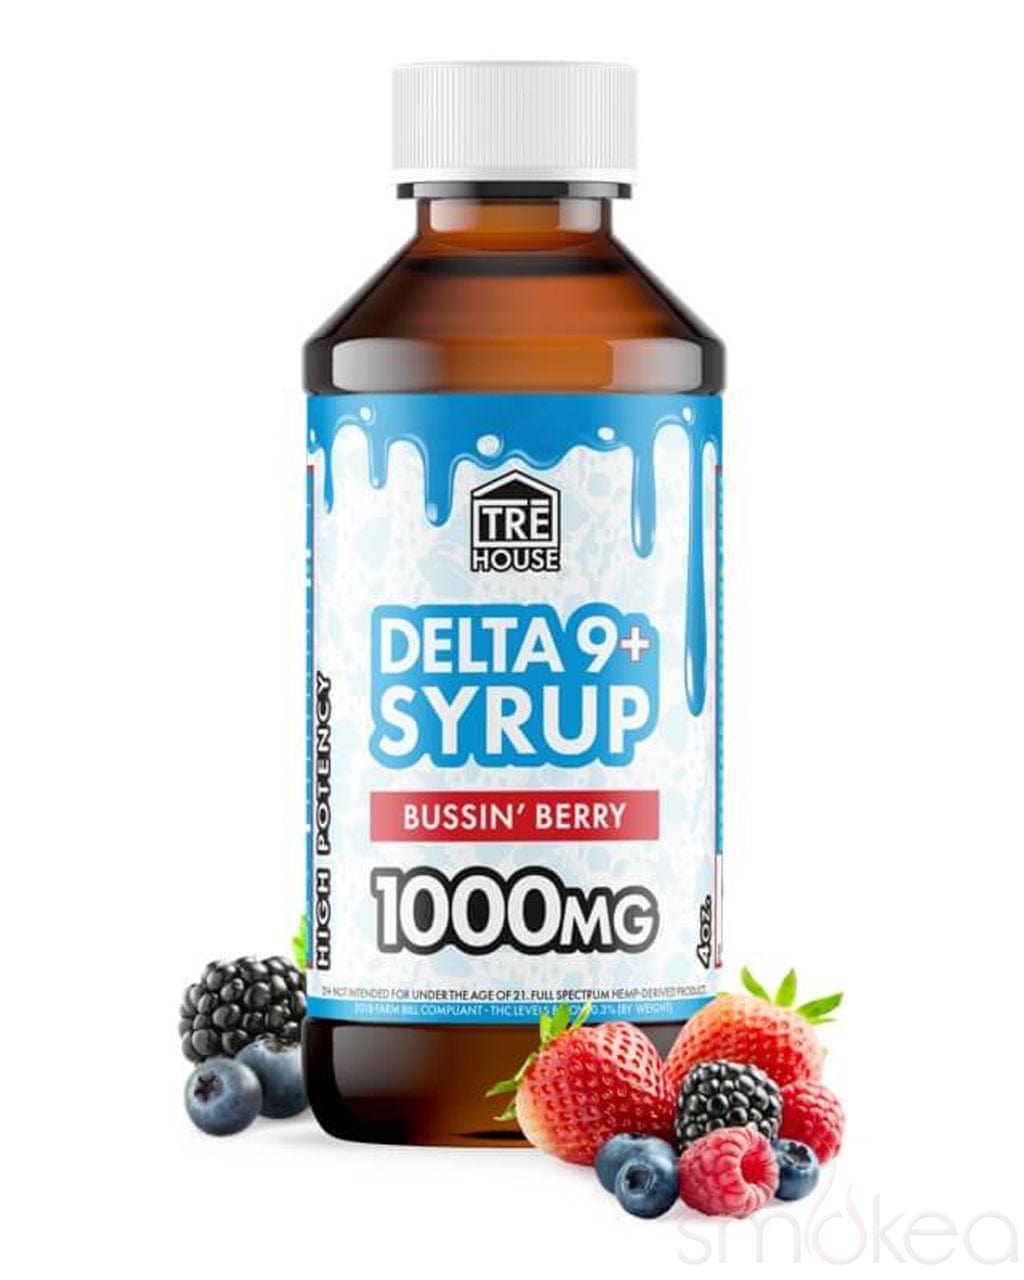 TRĒ House Delta 9 Syrup - Bussin' Berry